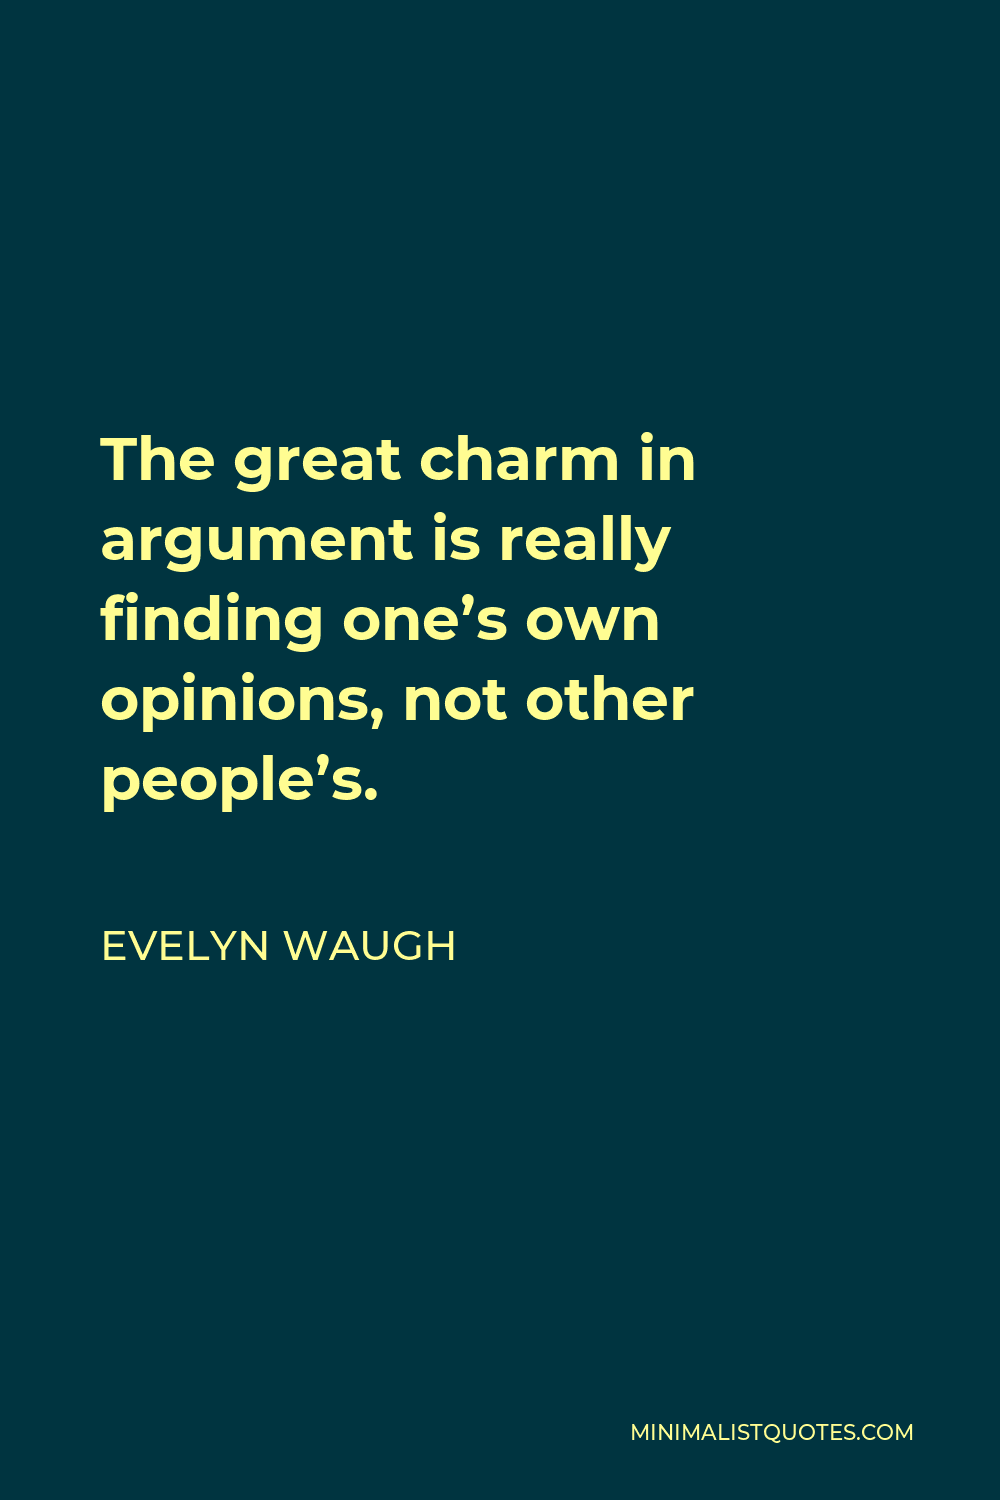 Evelyn Waugh Quote - The great charm in argument is really finding one’s own opinions, not other people’s.